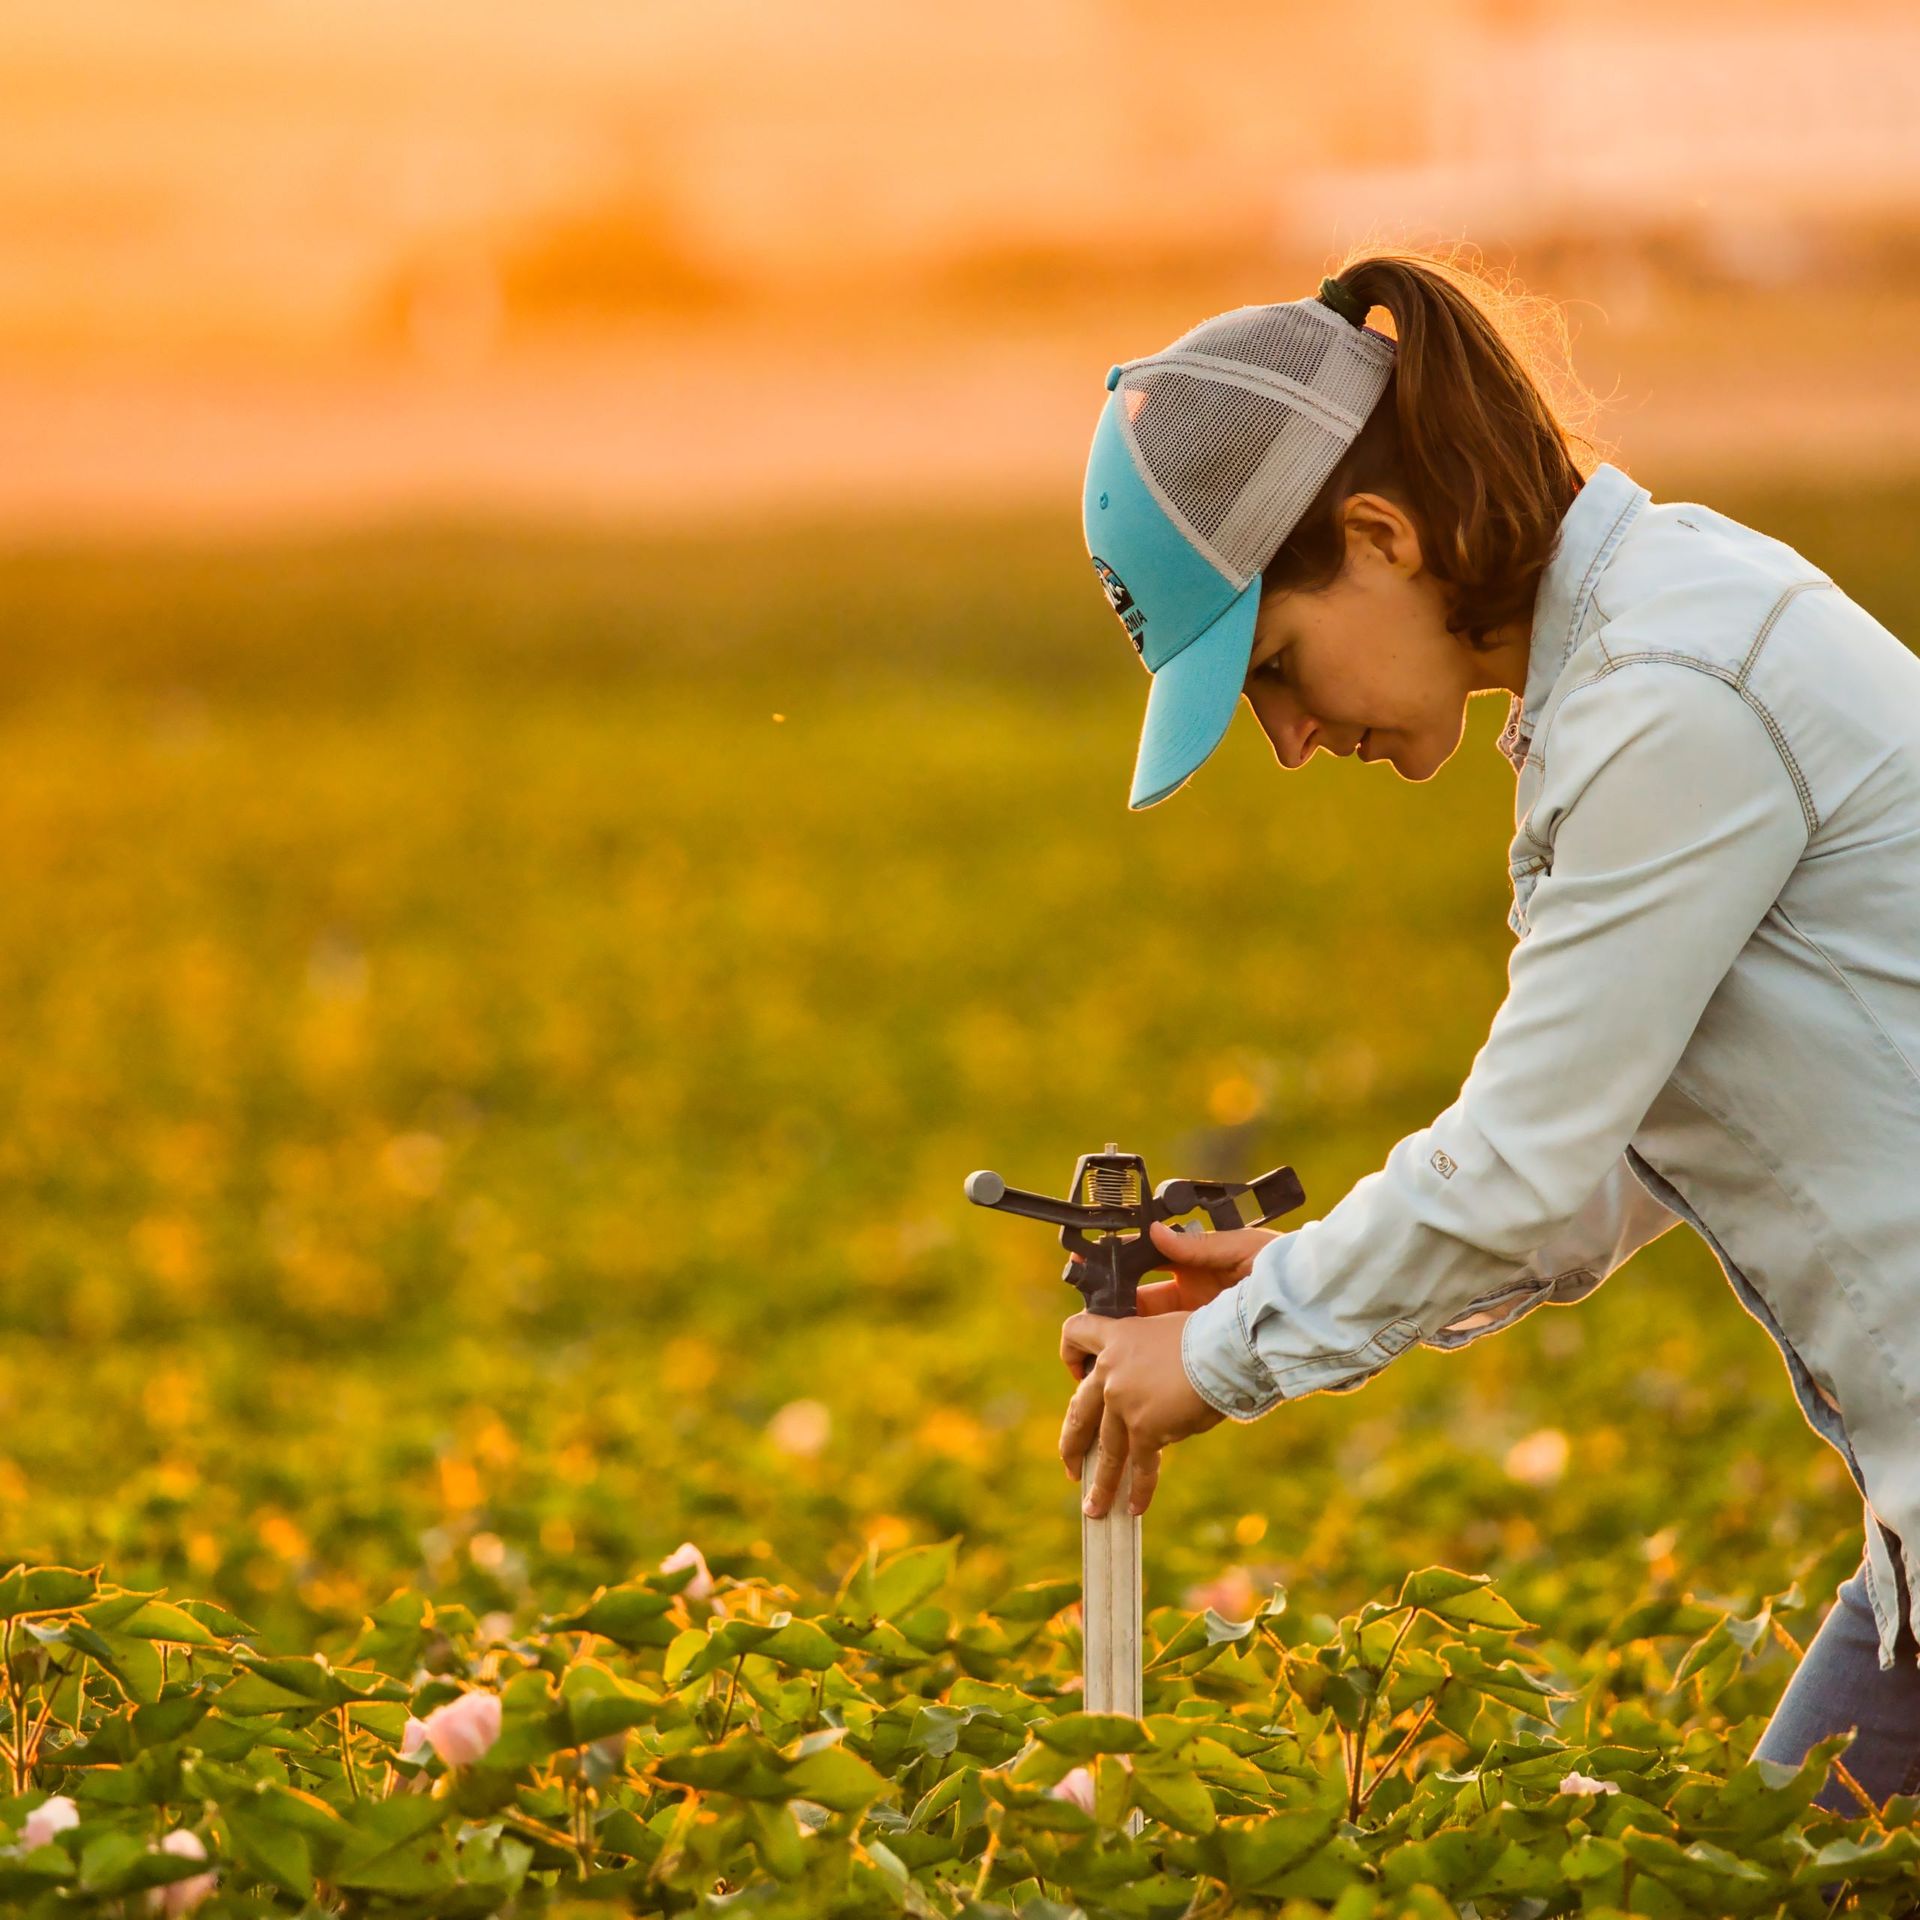 Image of a farmer maintaining an irrigation system in a field